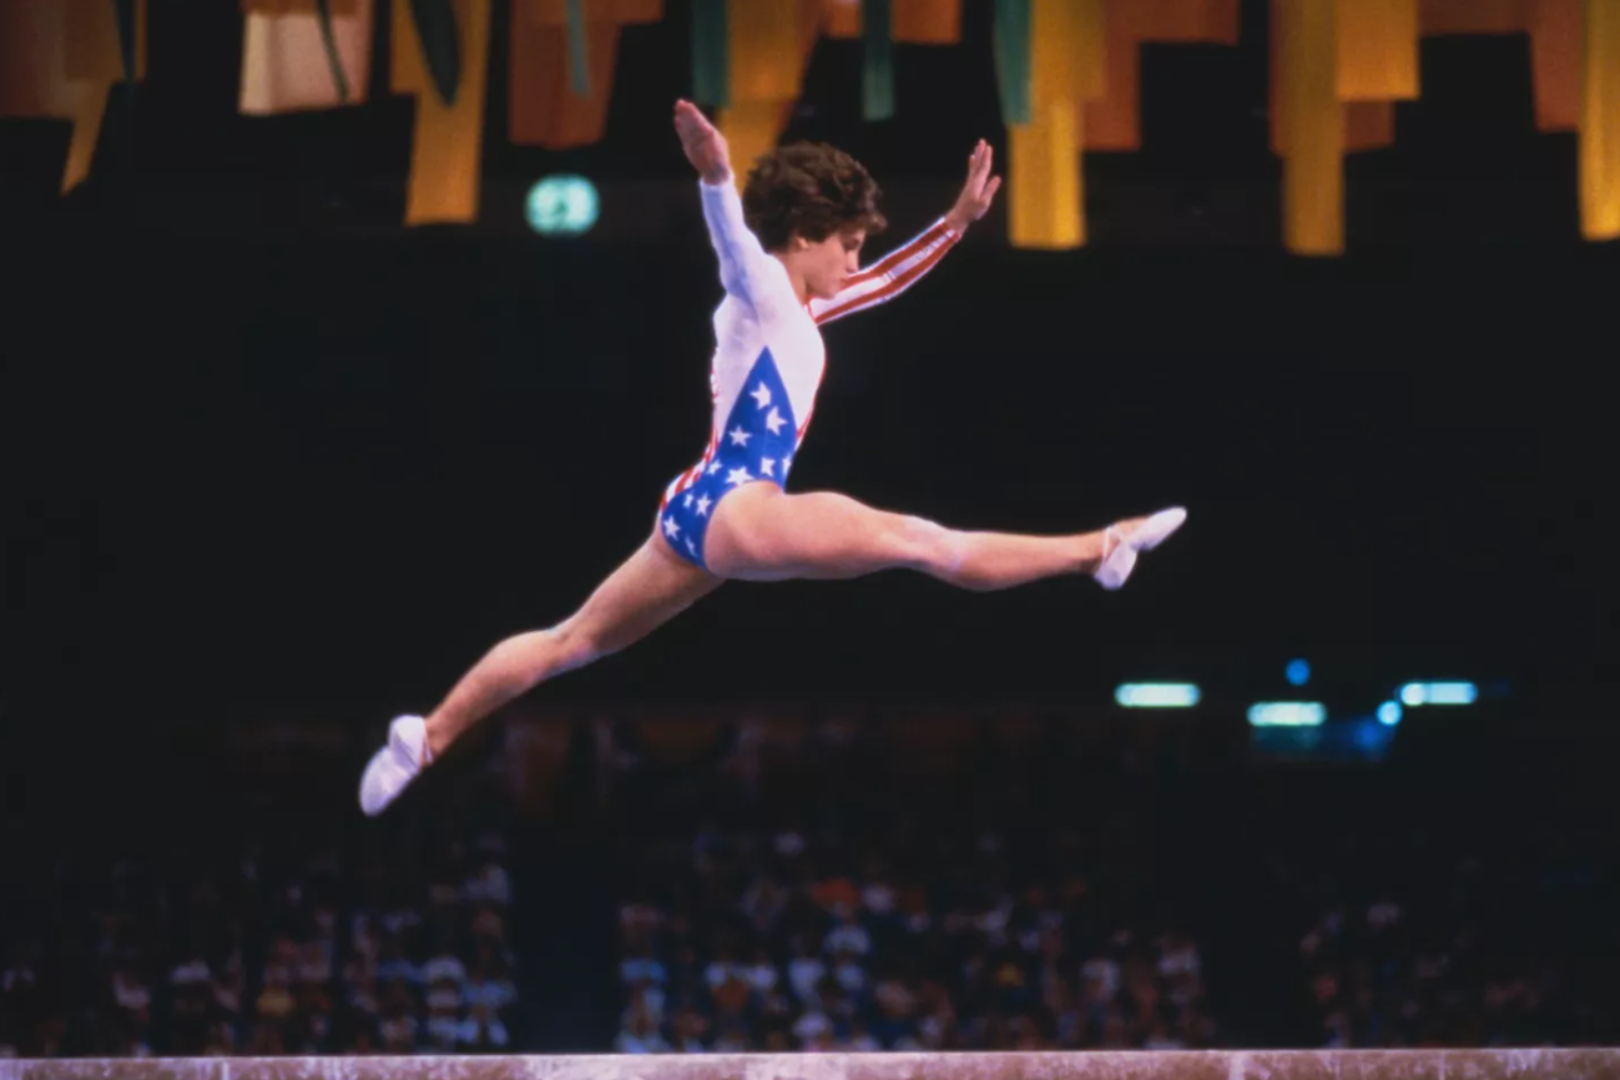 article_img / Did Mary Lou Retton Ever Get a Perfect 10?